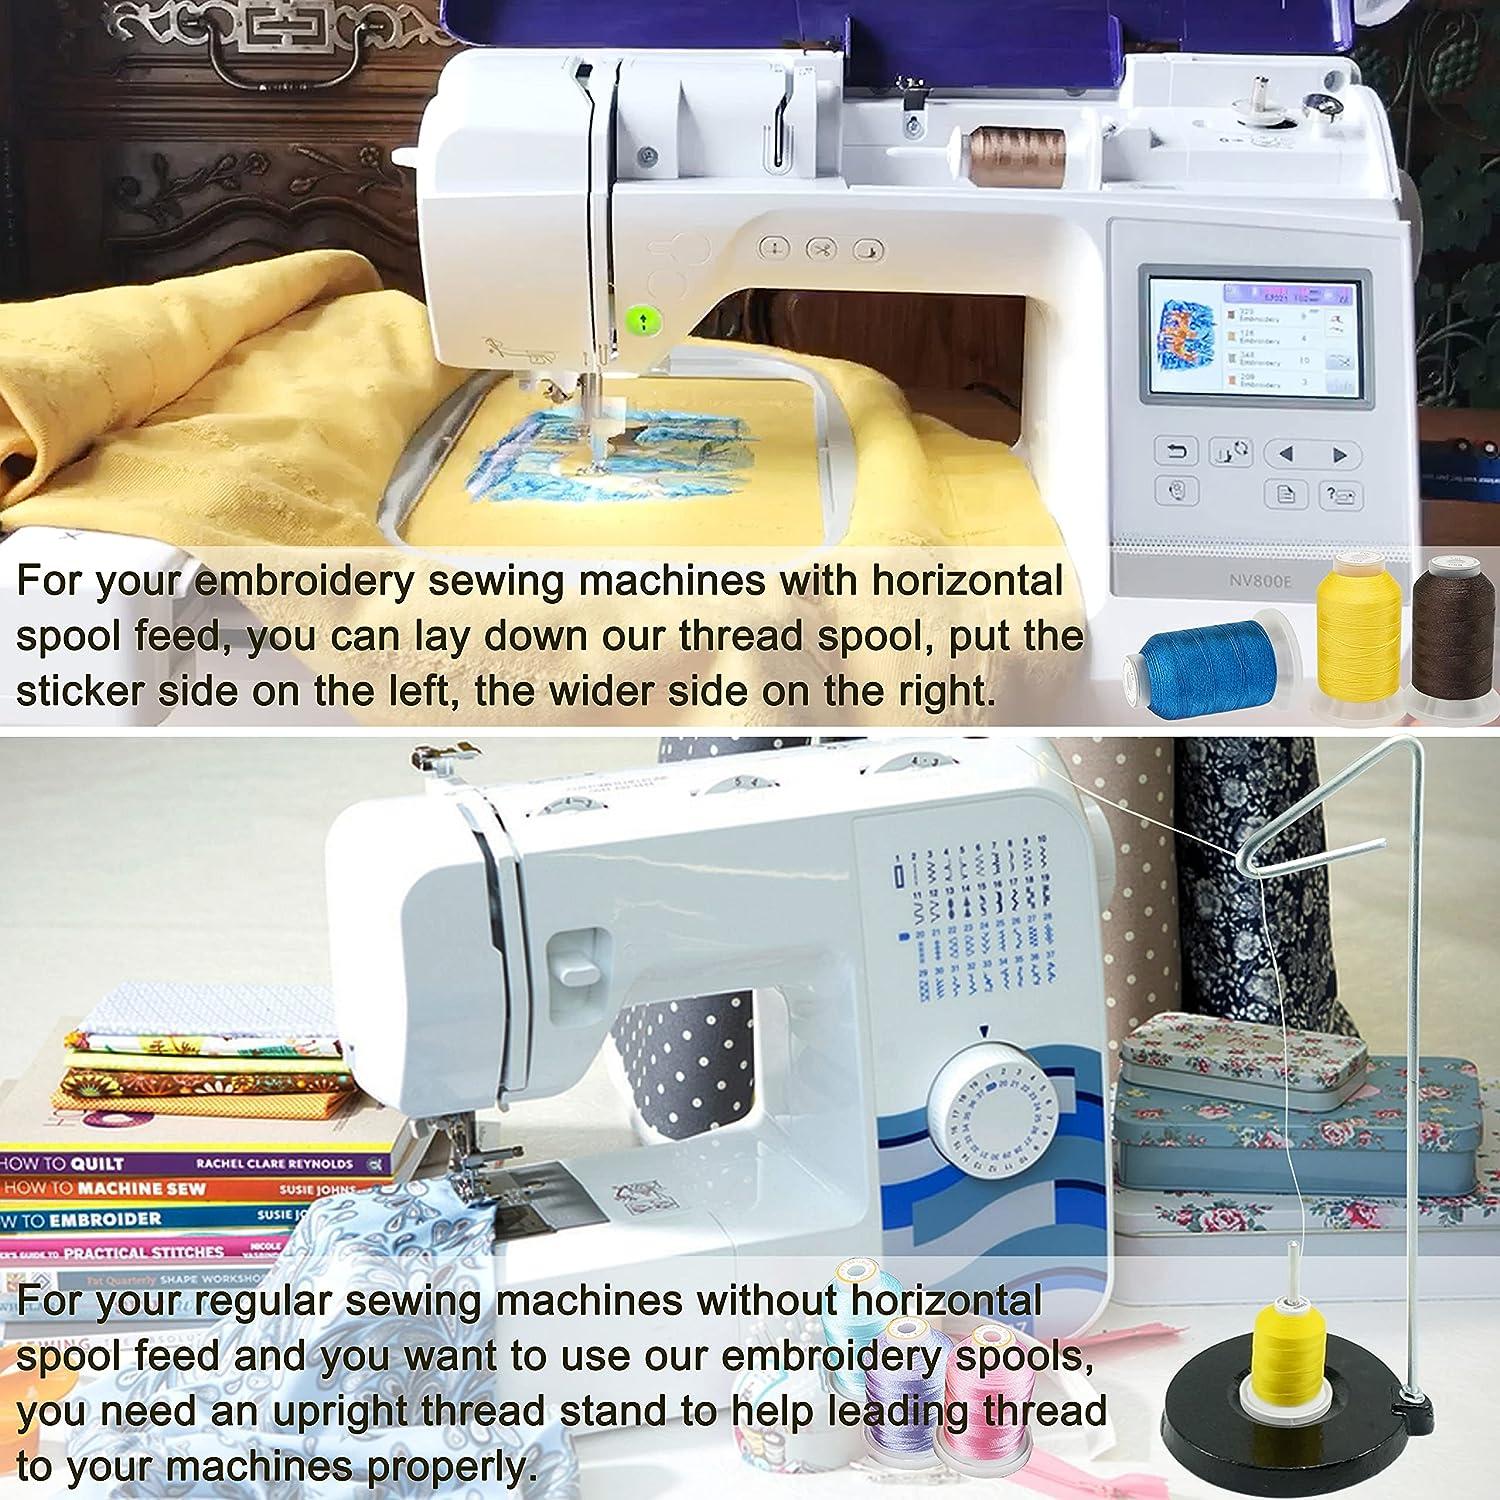 How To Embroider On A Regular Home Sewing Machine